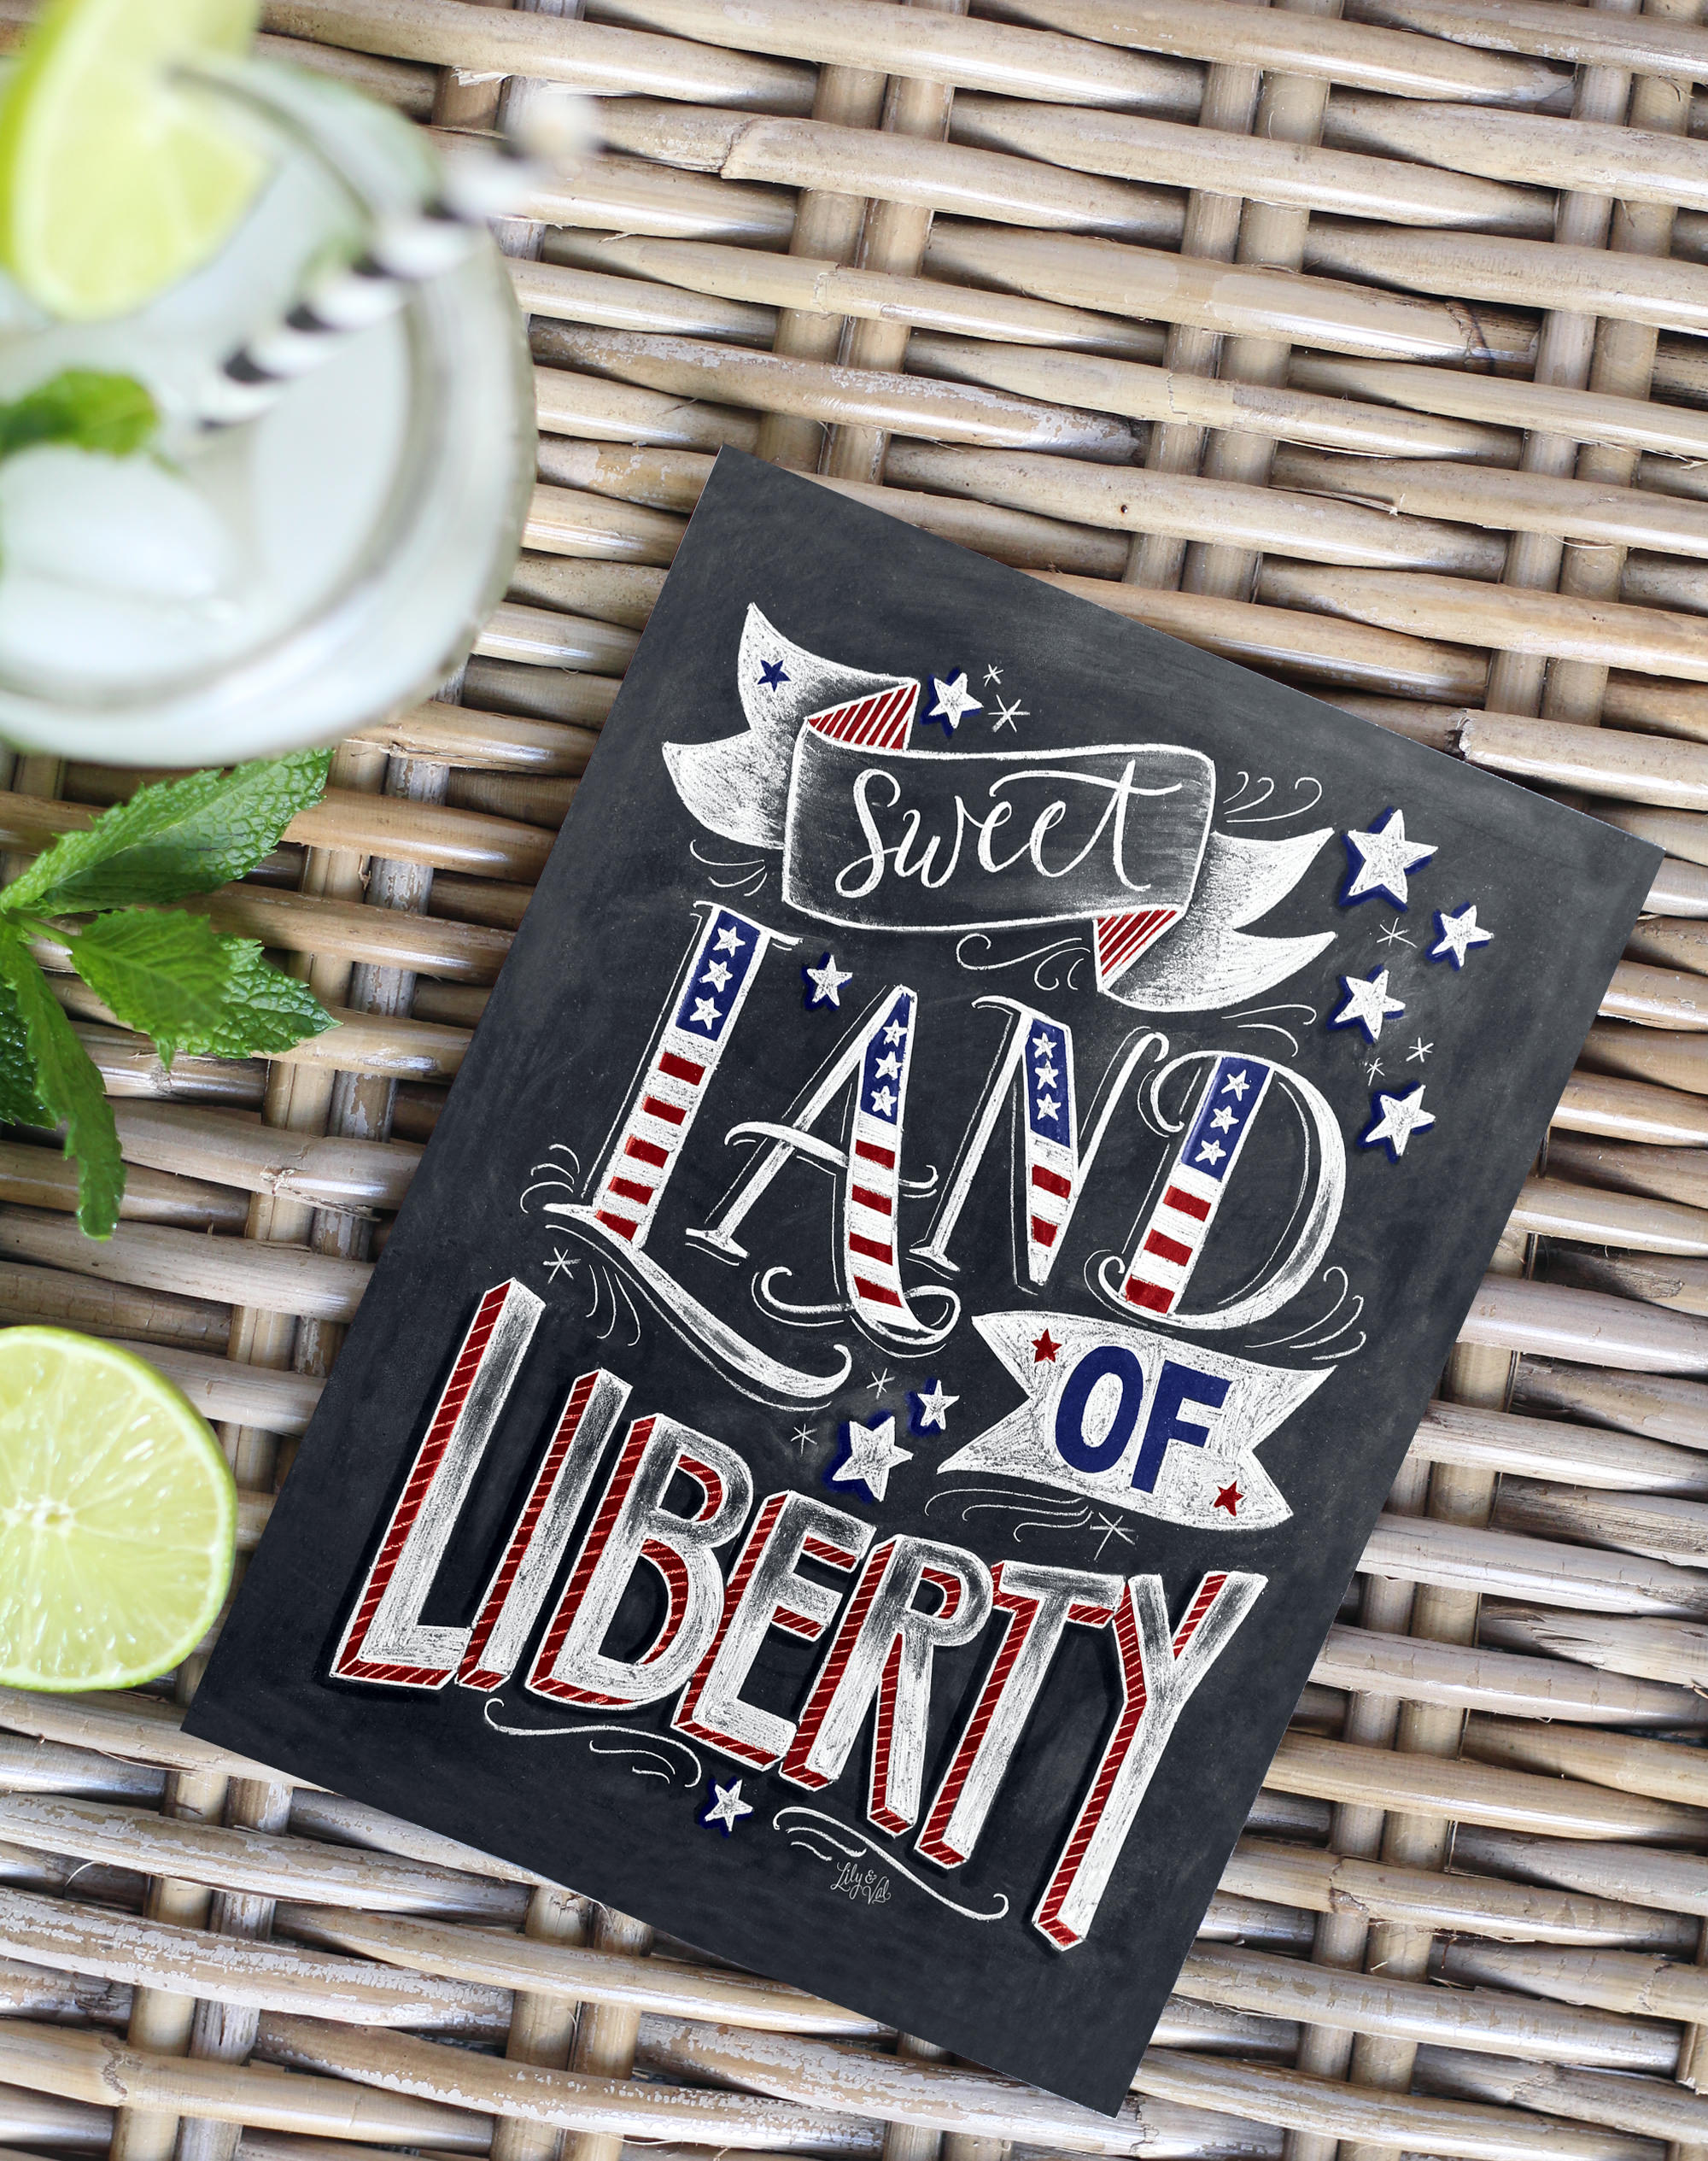 Sweet Land of Liberty Chalk Art Print available on lilyandval.com; Perfect decor for your 4th of July parties